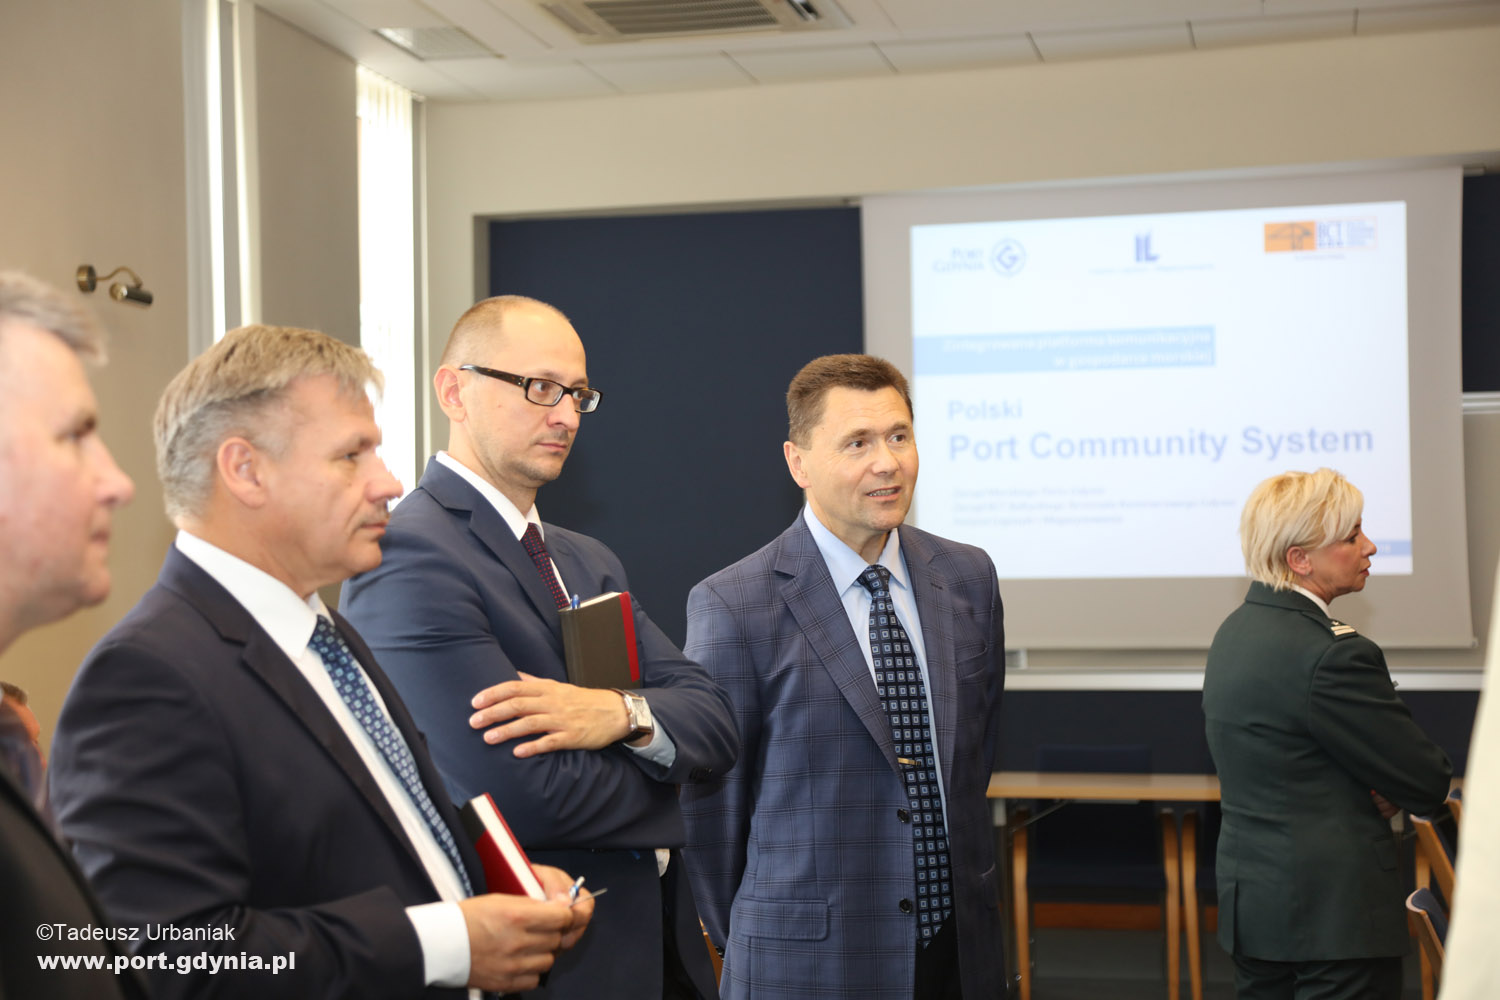 The first stage of works on the Port Community System in Gdynia - MarinePoland.com